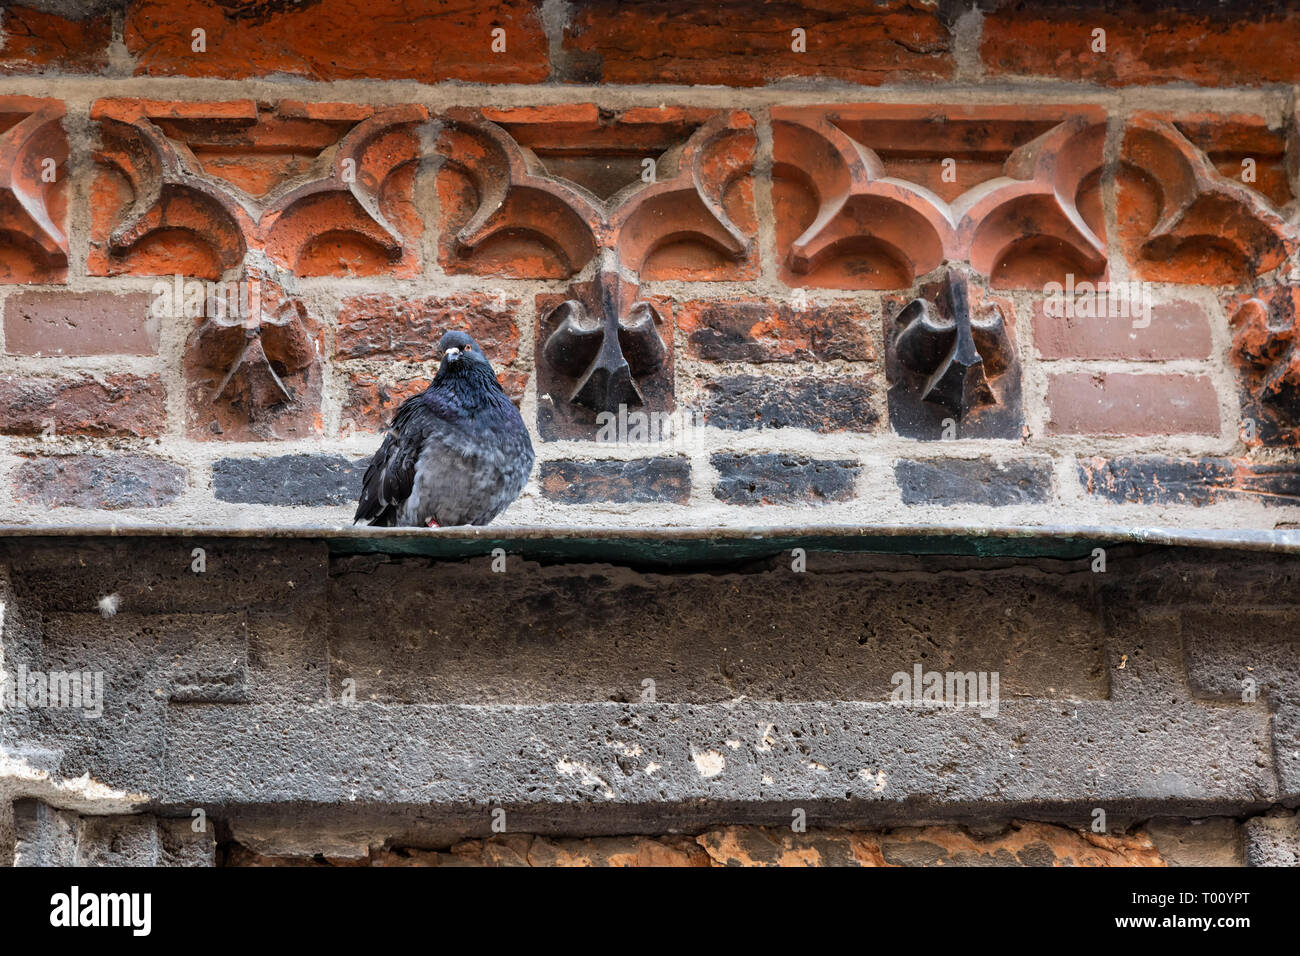 Pigeons on a wall ledge Stock Photo